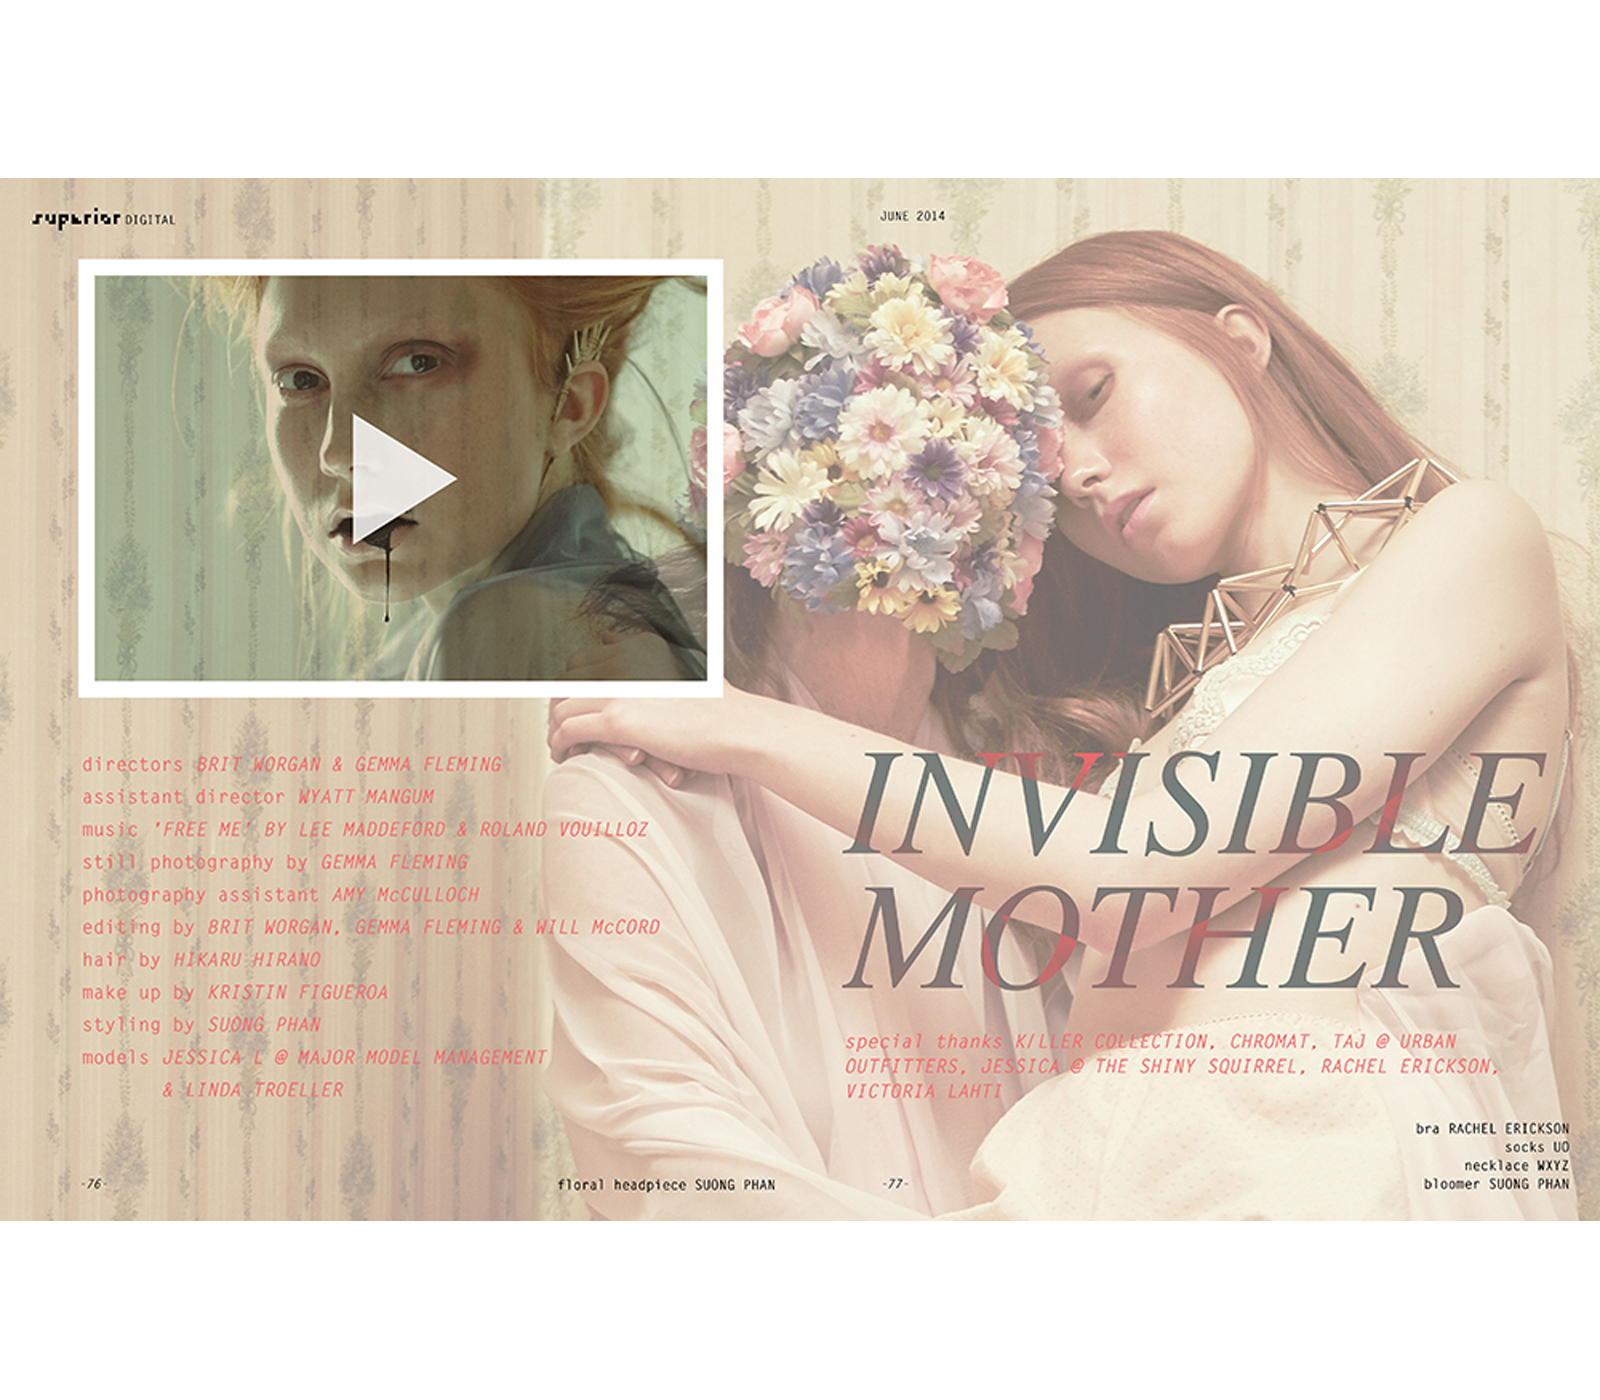 SUPERIOR_june_INVISIBLE_MOTHER copy.png